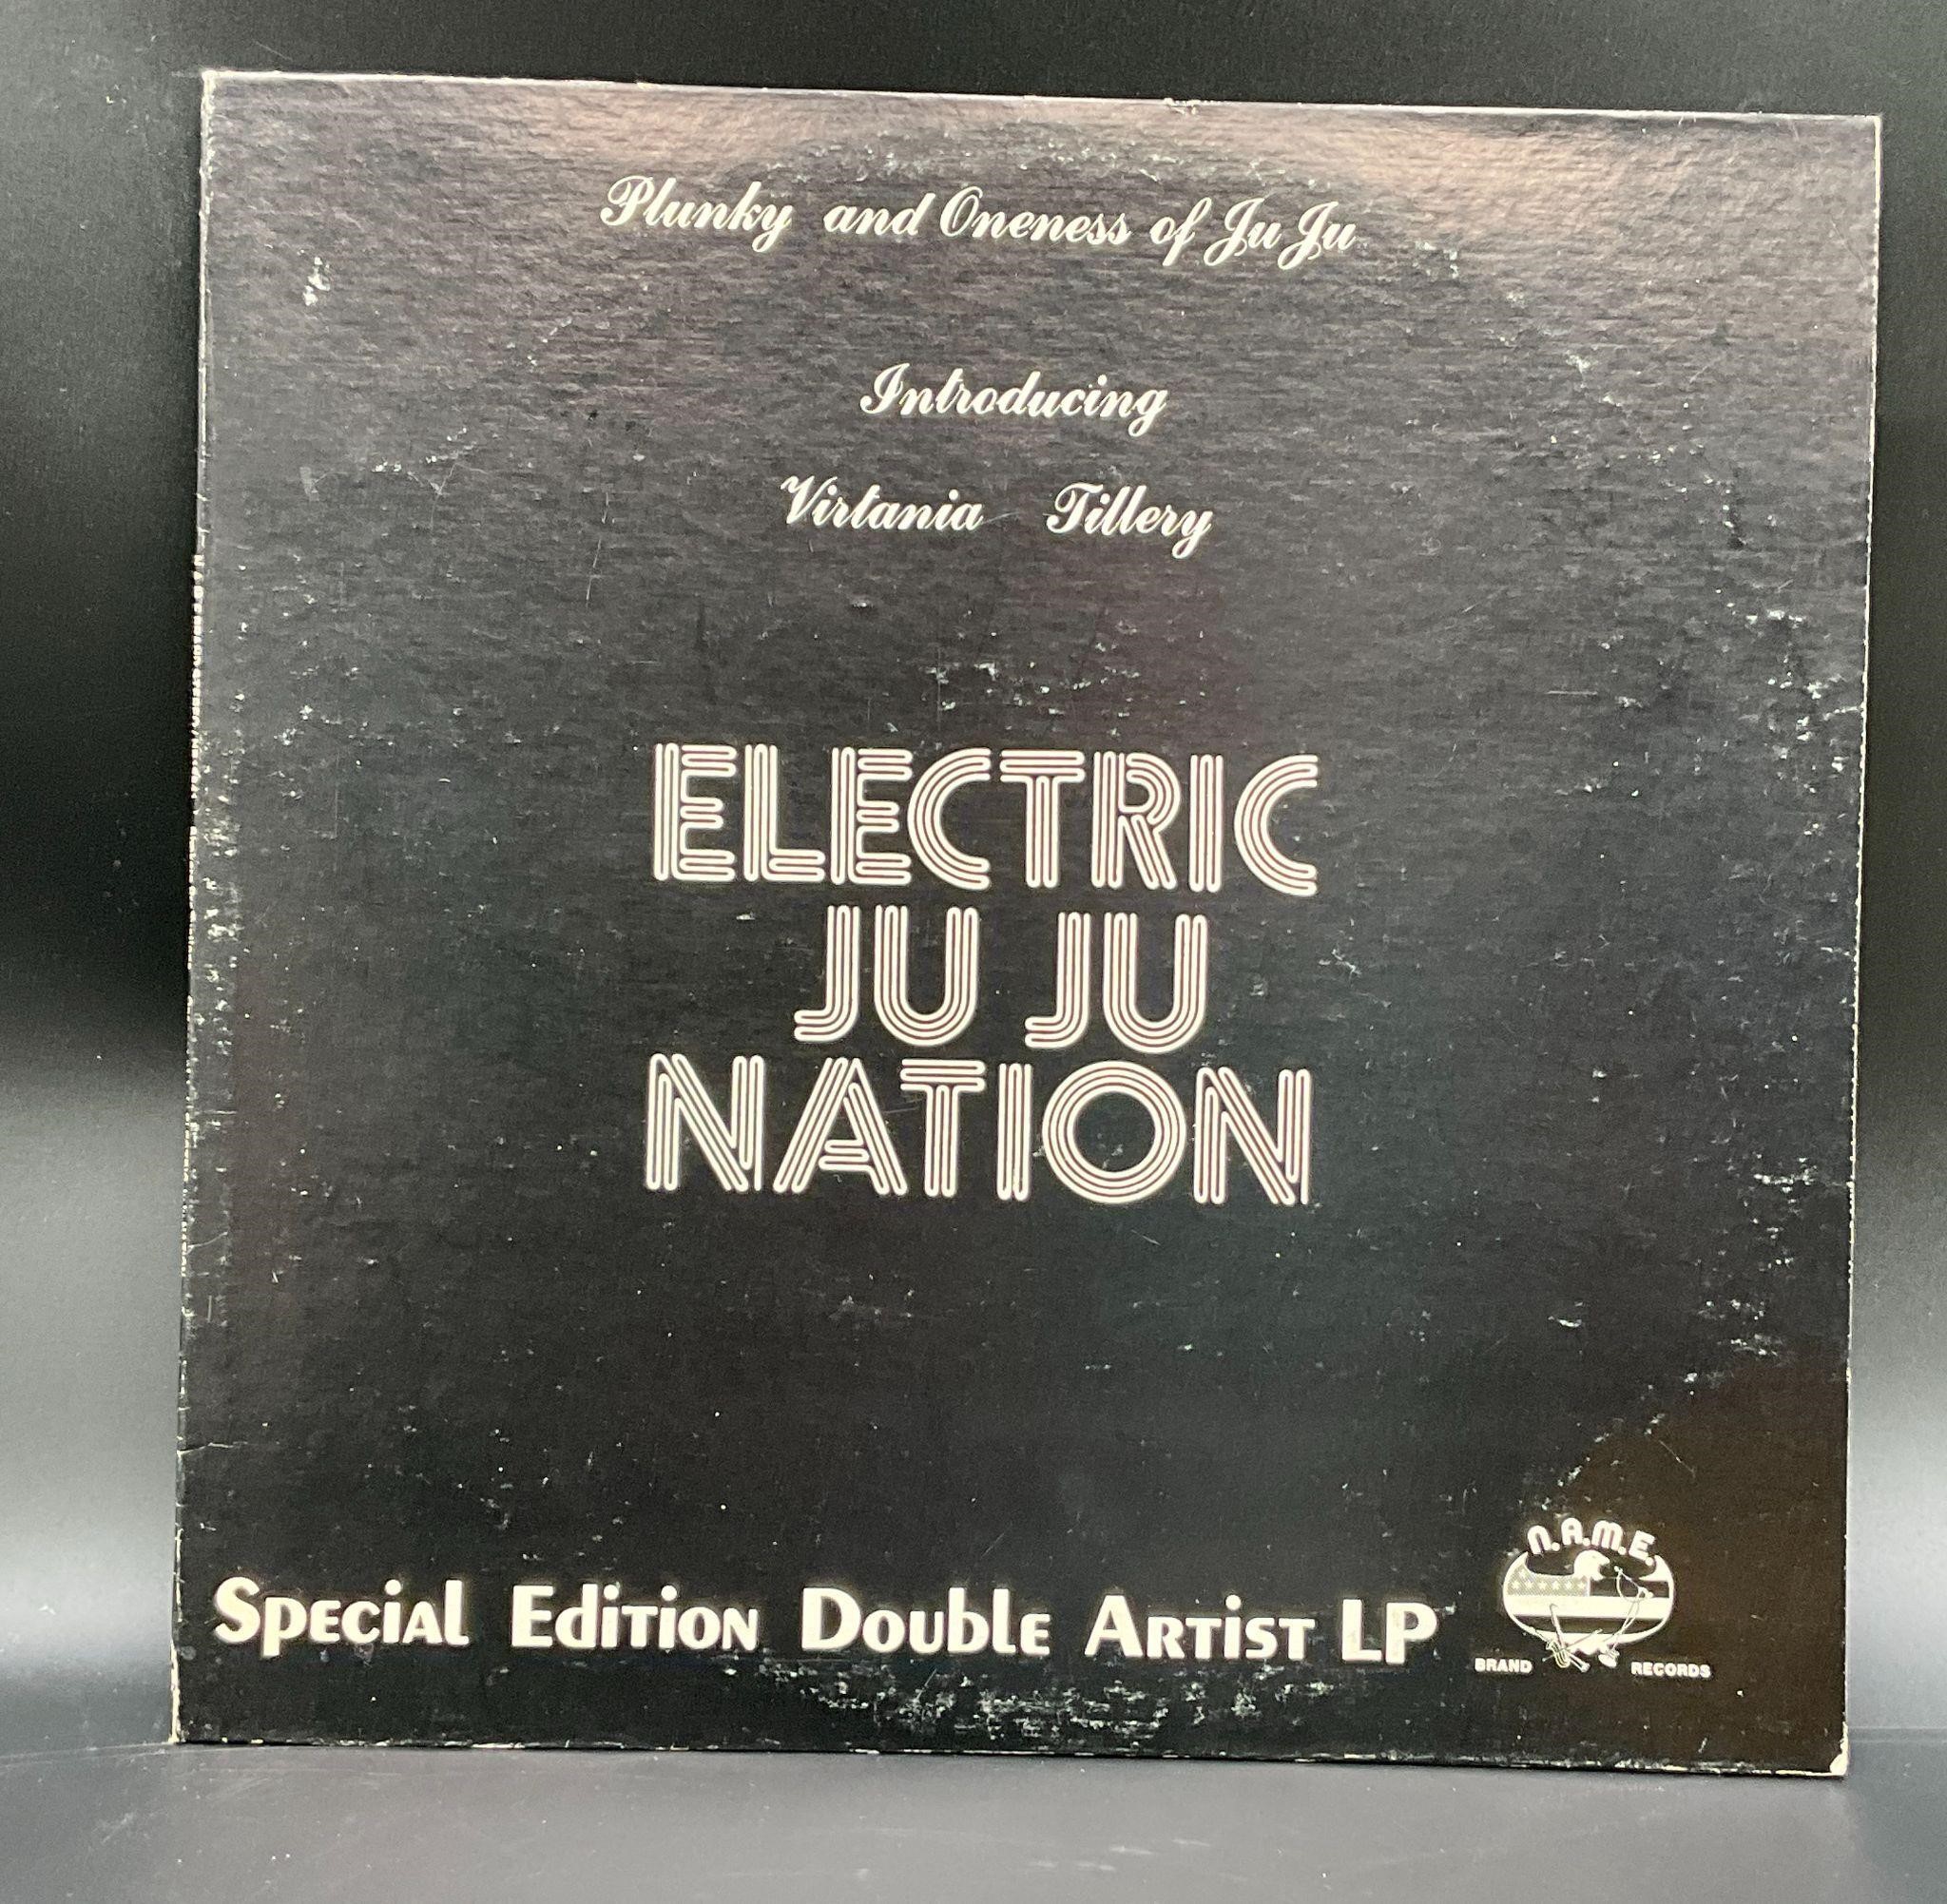 1984 Plunky & Oneness "Electric Juju Nation" LP